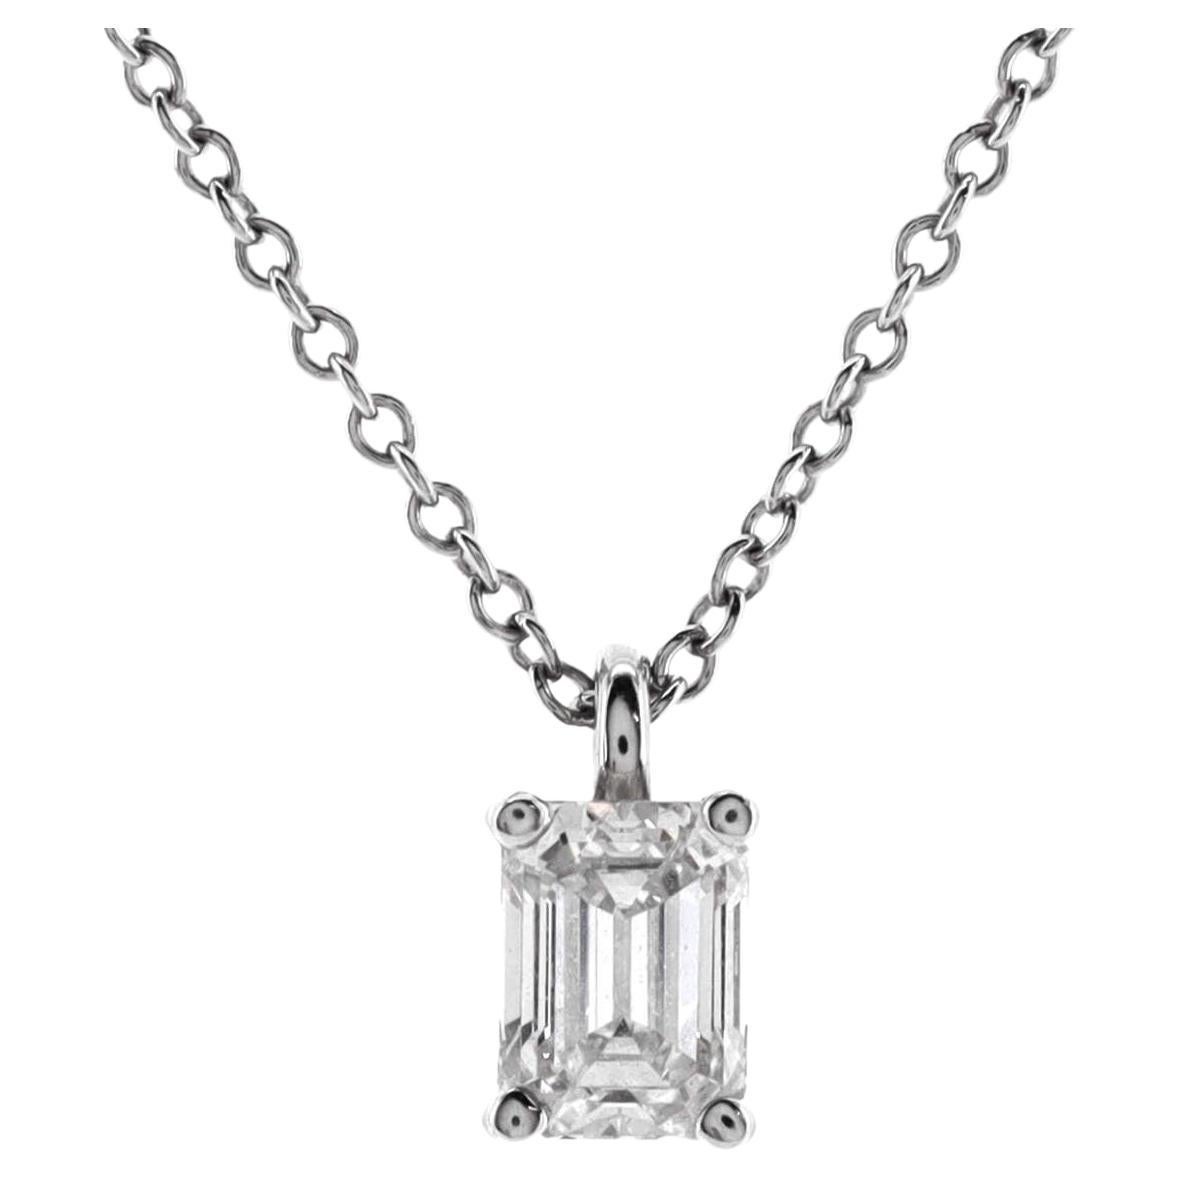 Tiffany & Co. Solitaire Pendant Necklace Platinum with Emerald Cut Diamond0.49CT For Sale